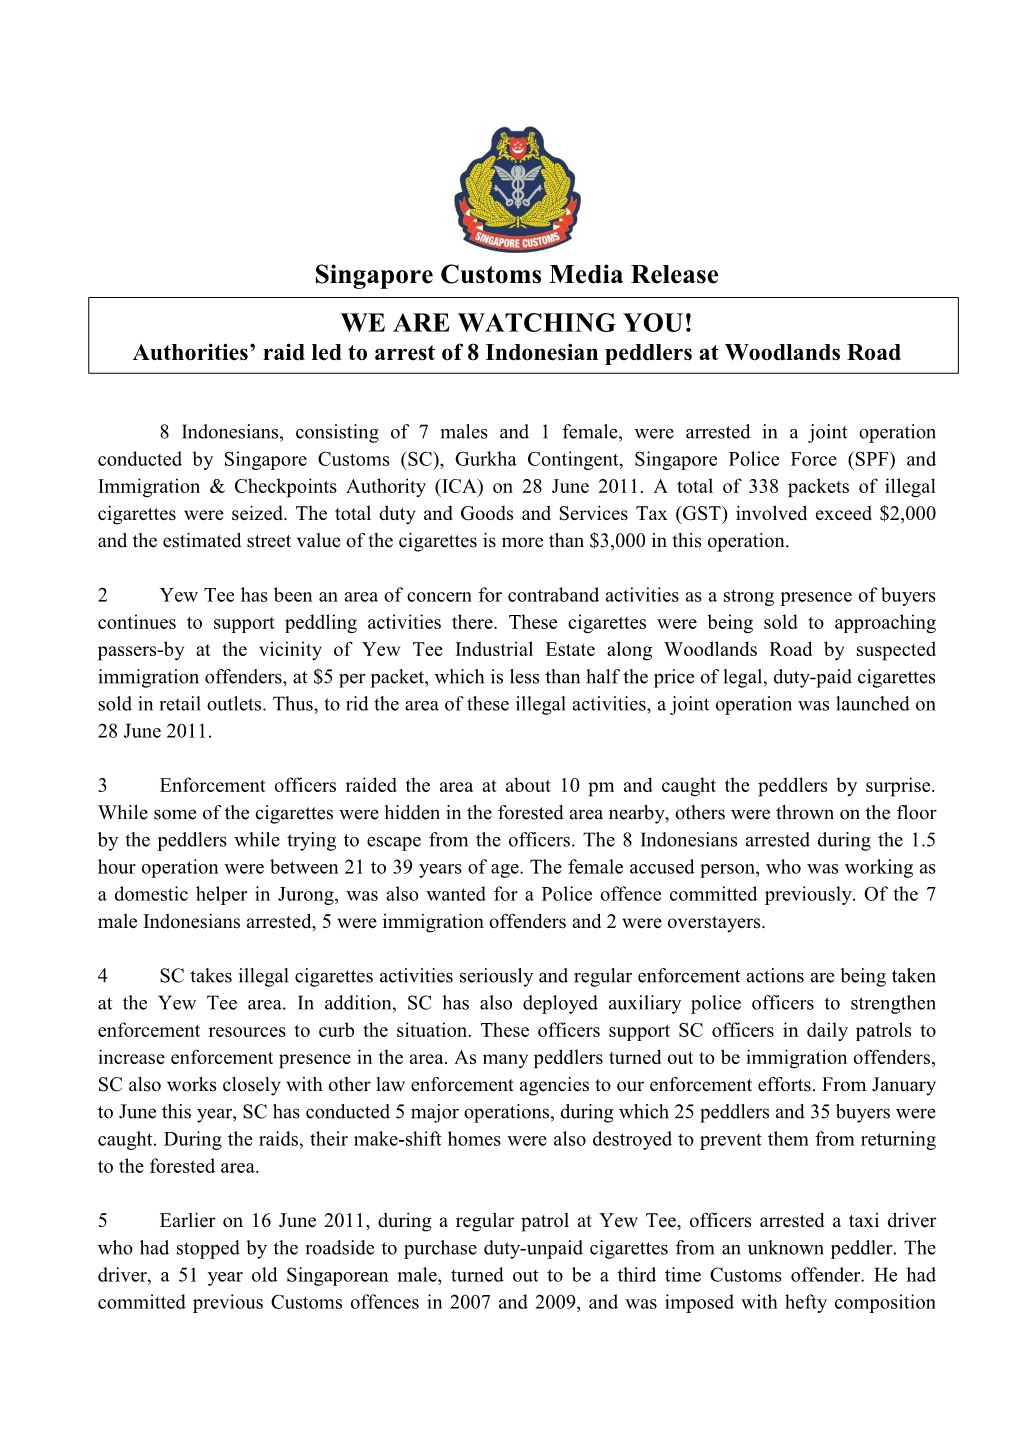 Media Release WE ARE WATCHING YOU! Authorities’ Raid Led to Arrest of 8 Indonesian Peddlers at Woodlands Road